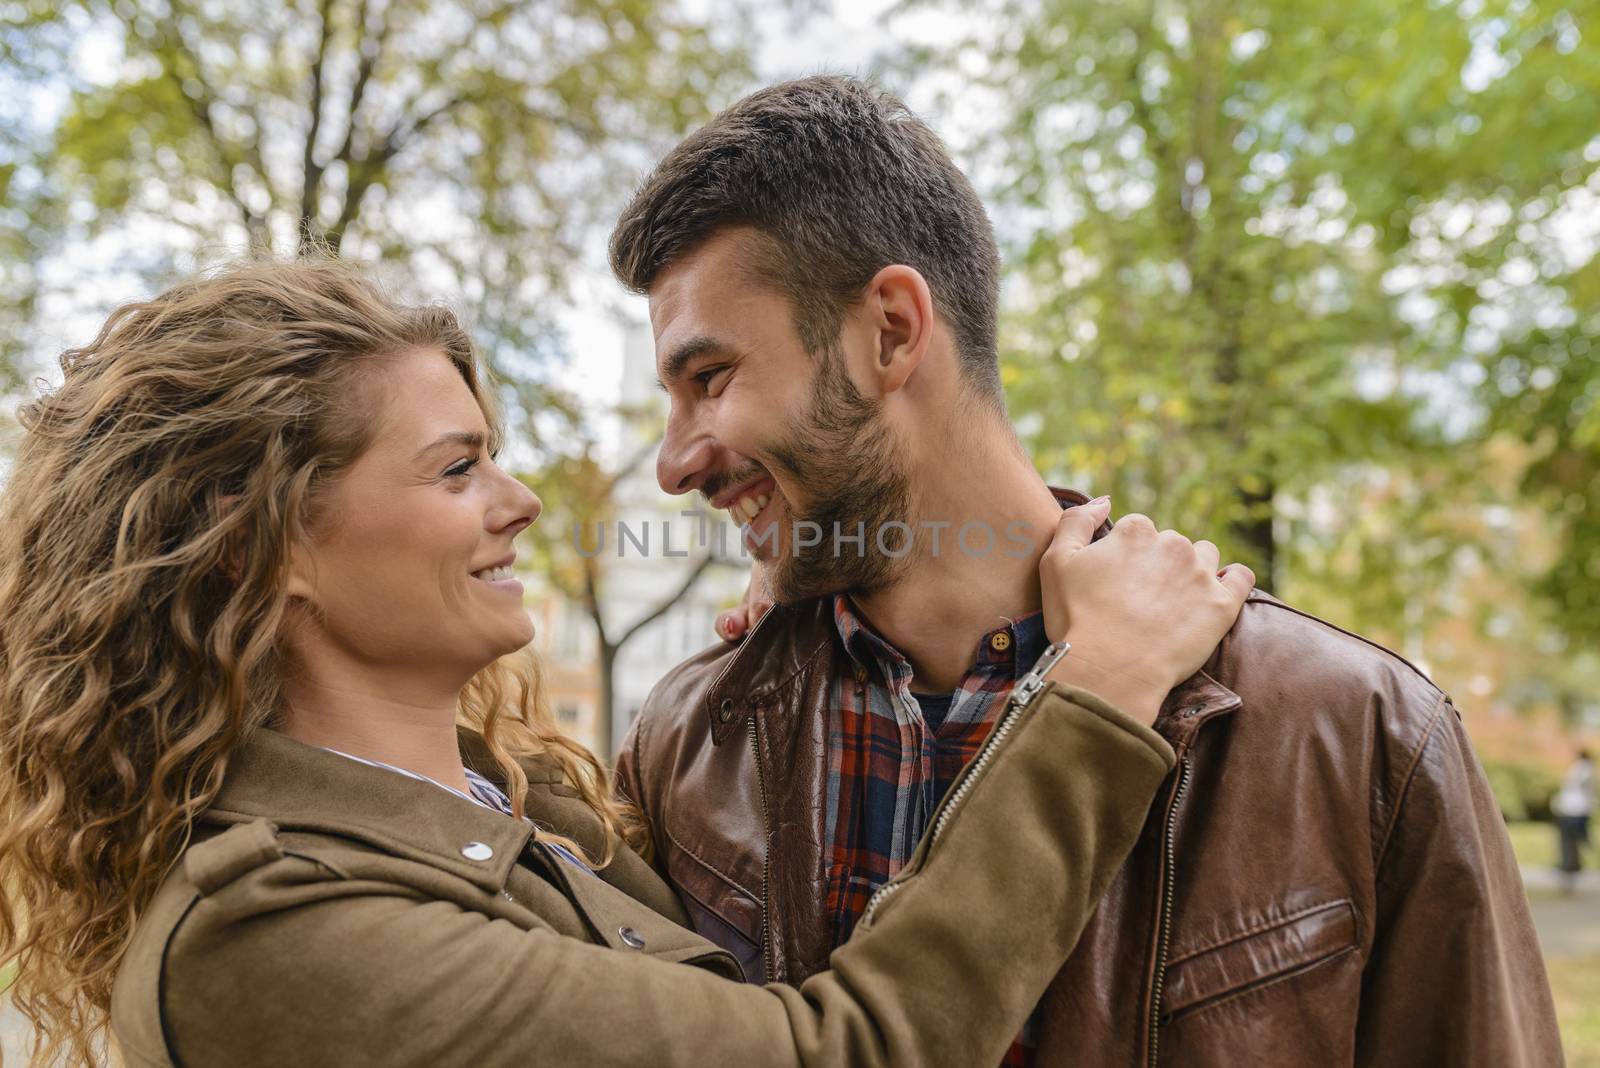 Beautiful young woman hugging her boyfriend and showing love emotions. Romantic moment